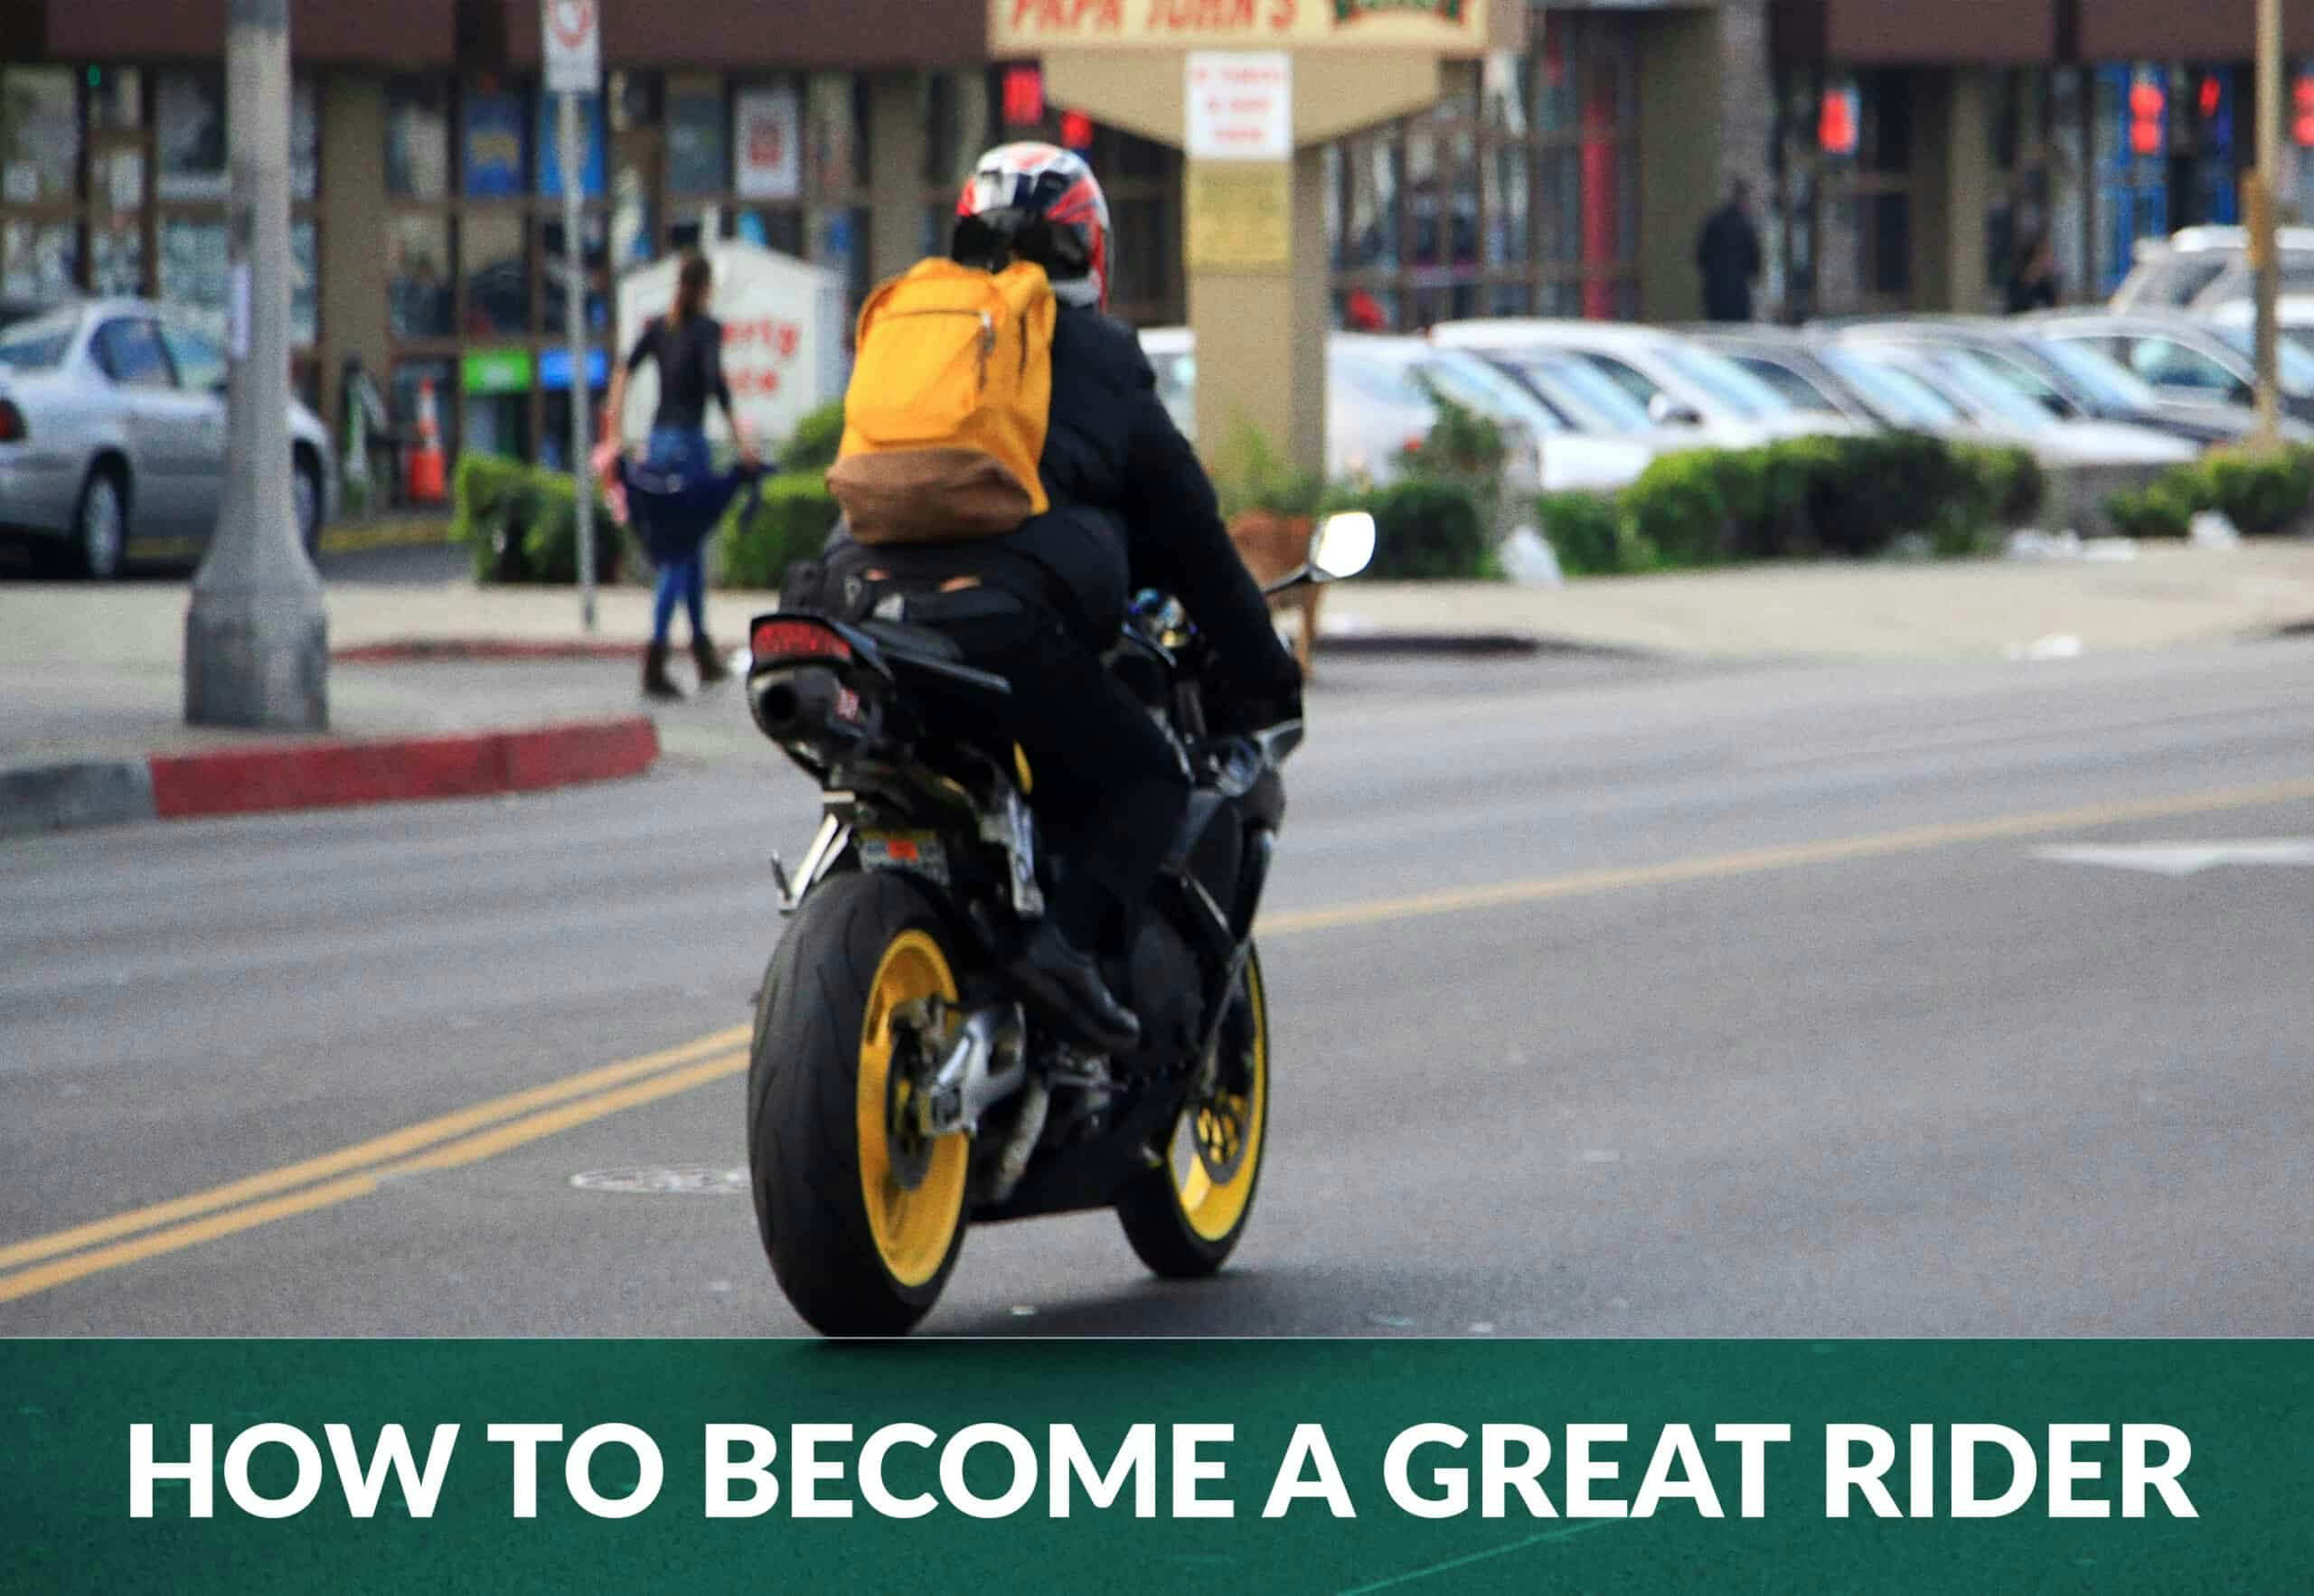 Mastering the Motorcycle: How to Become a Great Motorcyclist